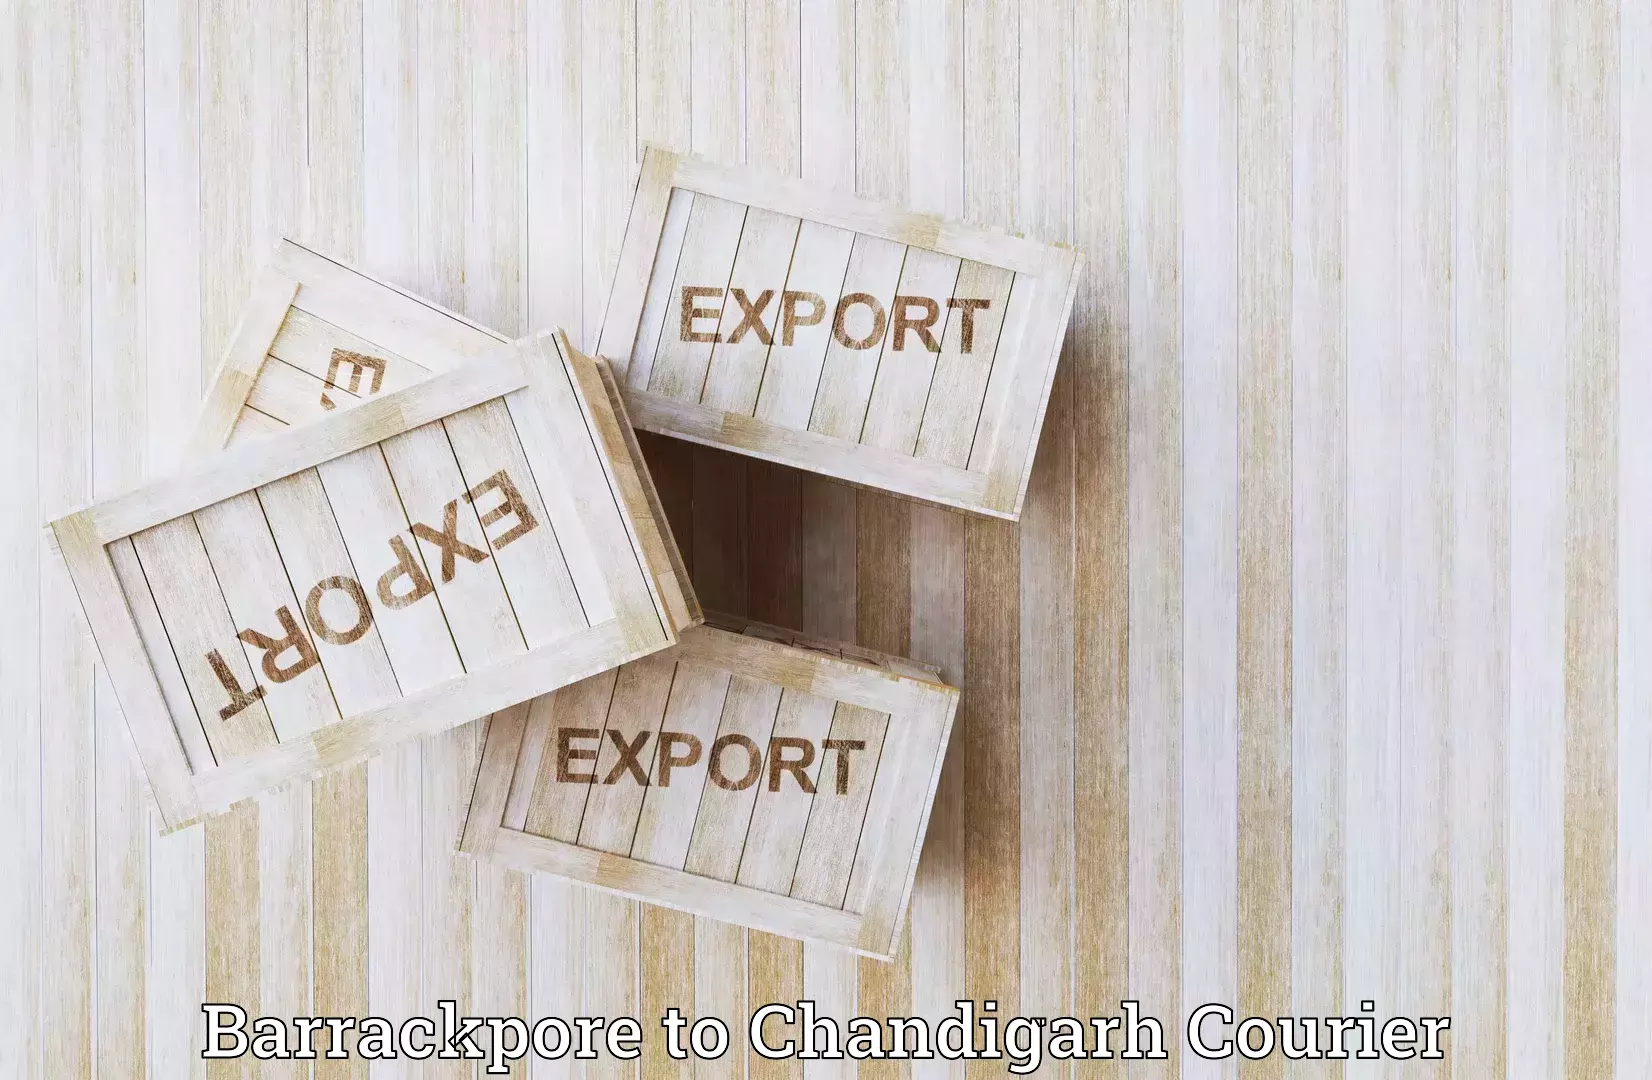 Efficient shipping operations Barrackpore to Chandigarh